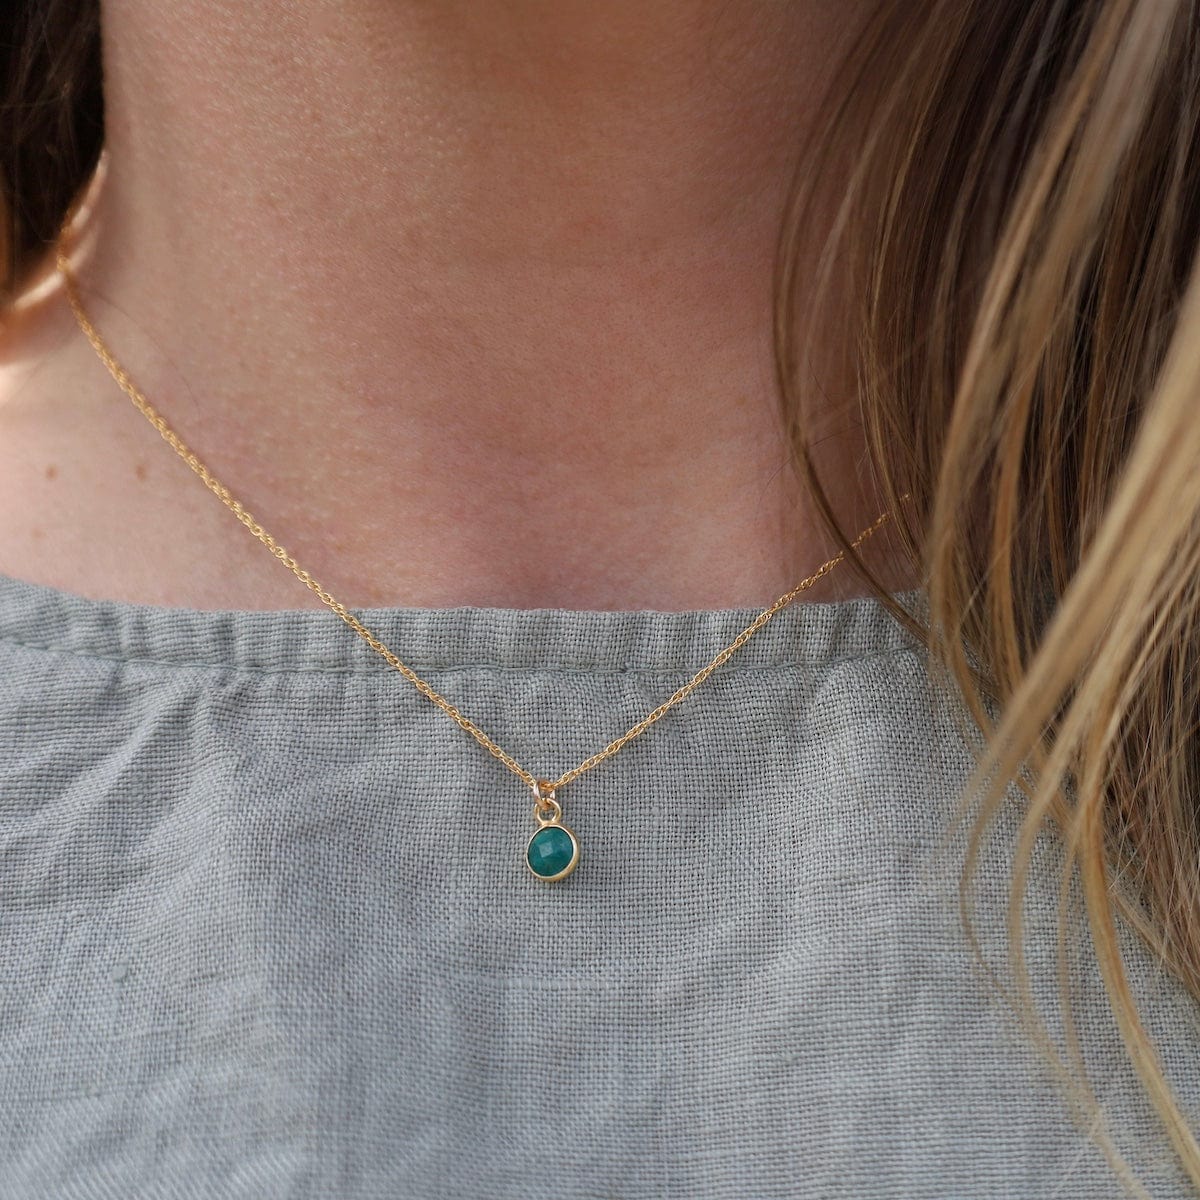 NKL-GF 14k Gold Filled Chain with 6mm Bezel-Set Green Chalcedony